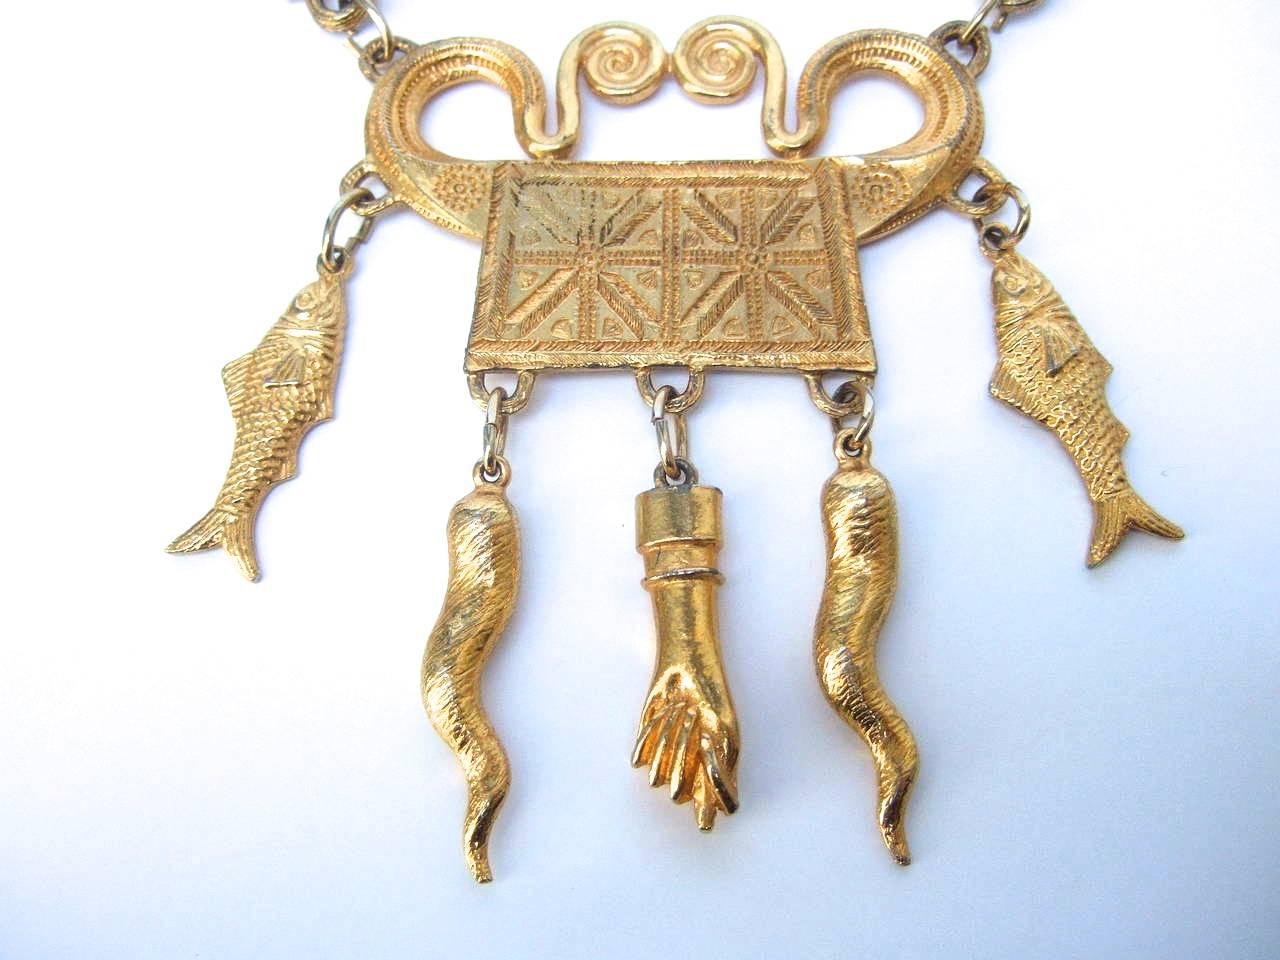 Women's Ornate Gilt Metal Etruscan Revival Necklace by Alexis Kirk